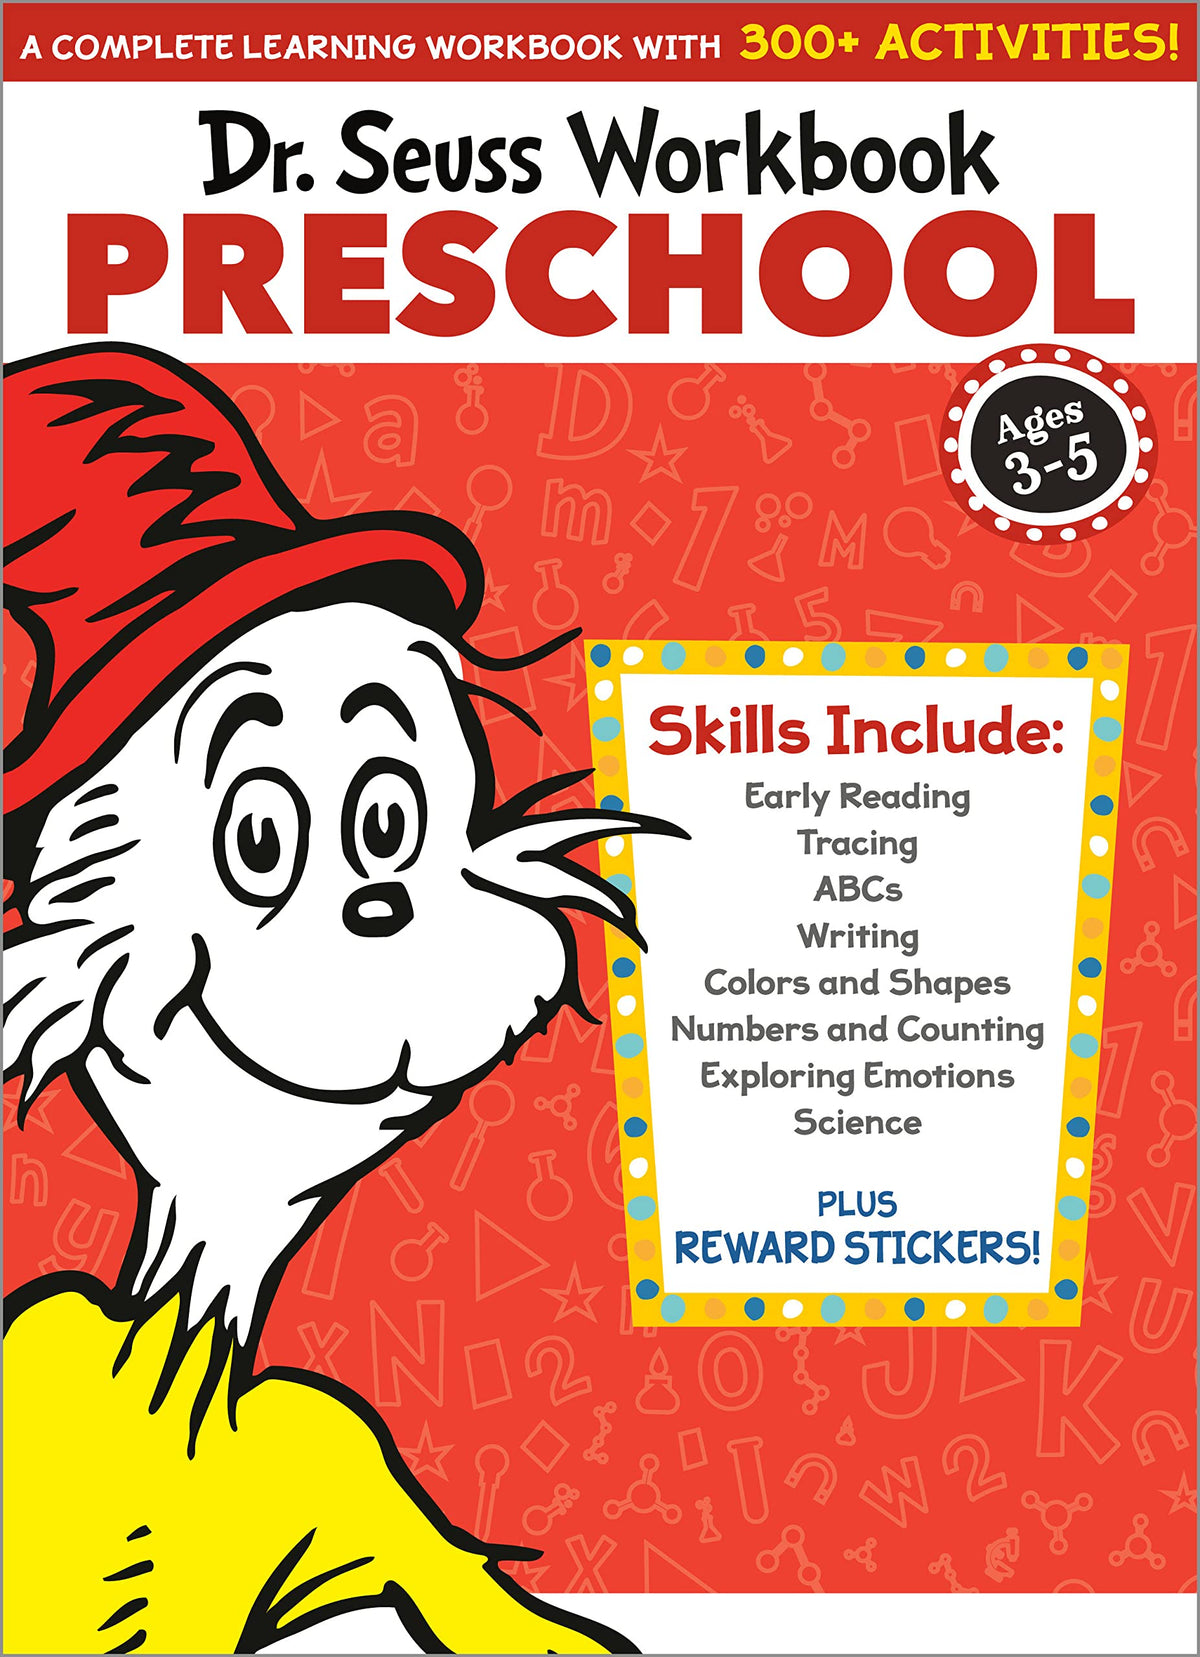 Dr. Seuss Workbook: Preschool: 300+ Fun Activities with Stickers and More! (Alphabet, ABCs, Tracing, Early Reading, Colors and Shapes, Numbers, ... Emotions, Science) (Dr. Seuss Workbooks)